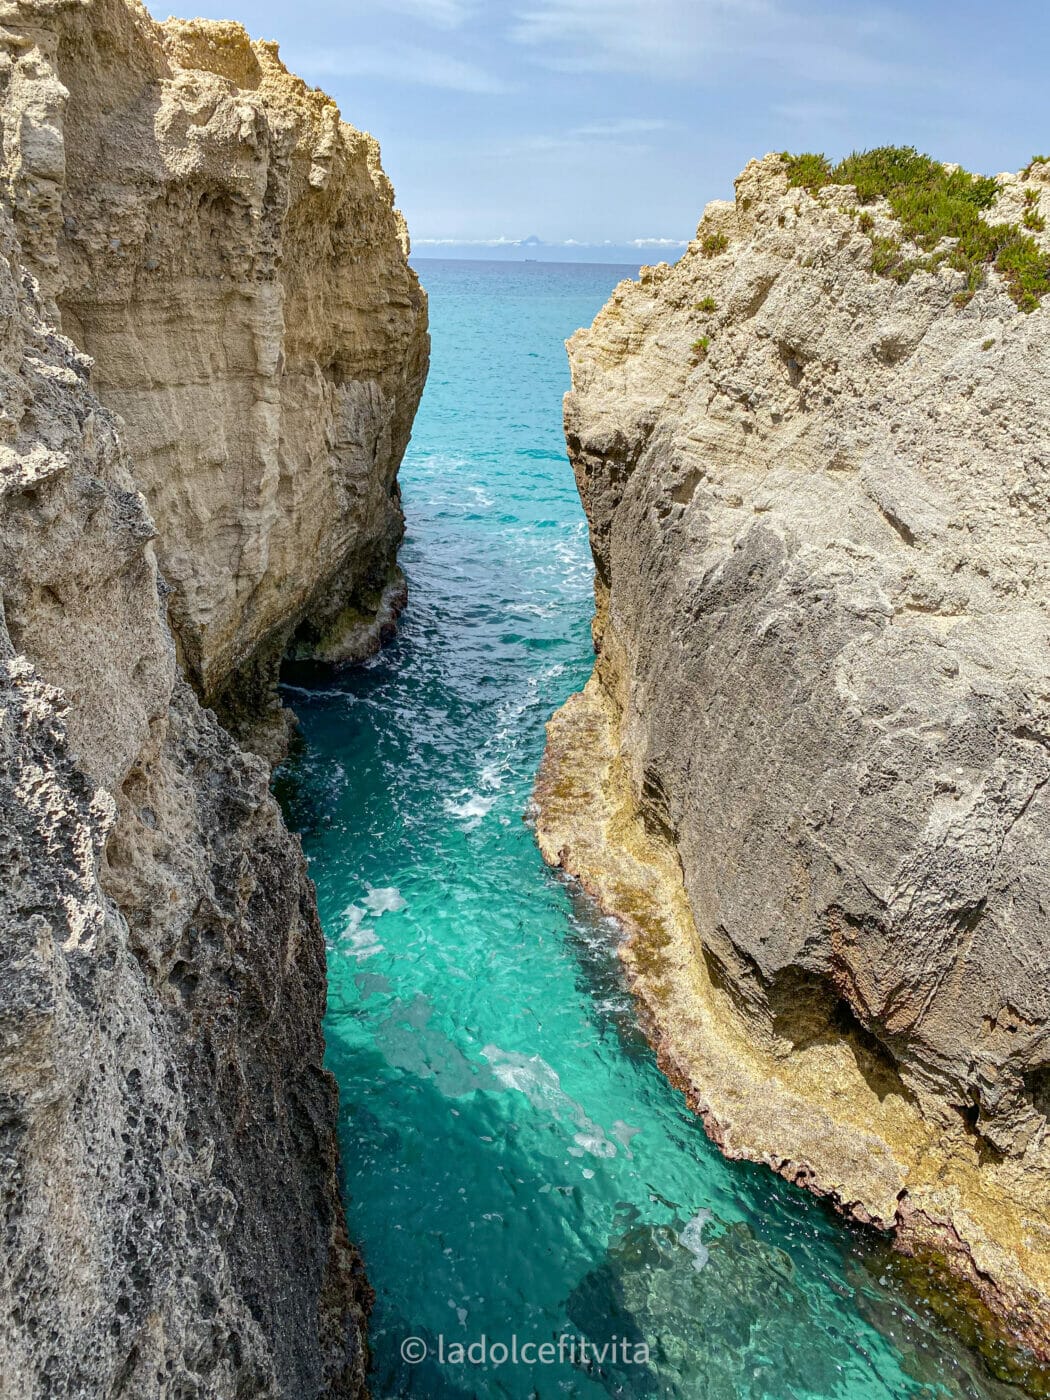 narrow gorge in the reef at riaci beach in calabria Italy